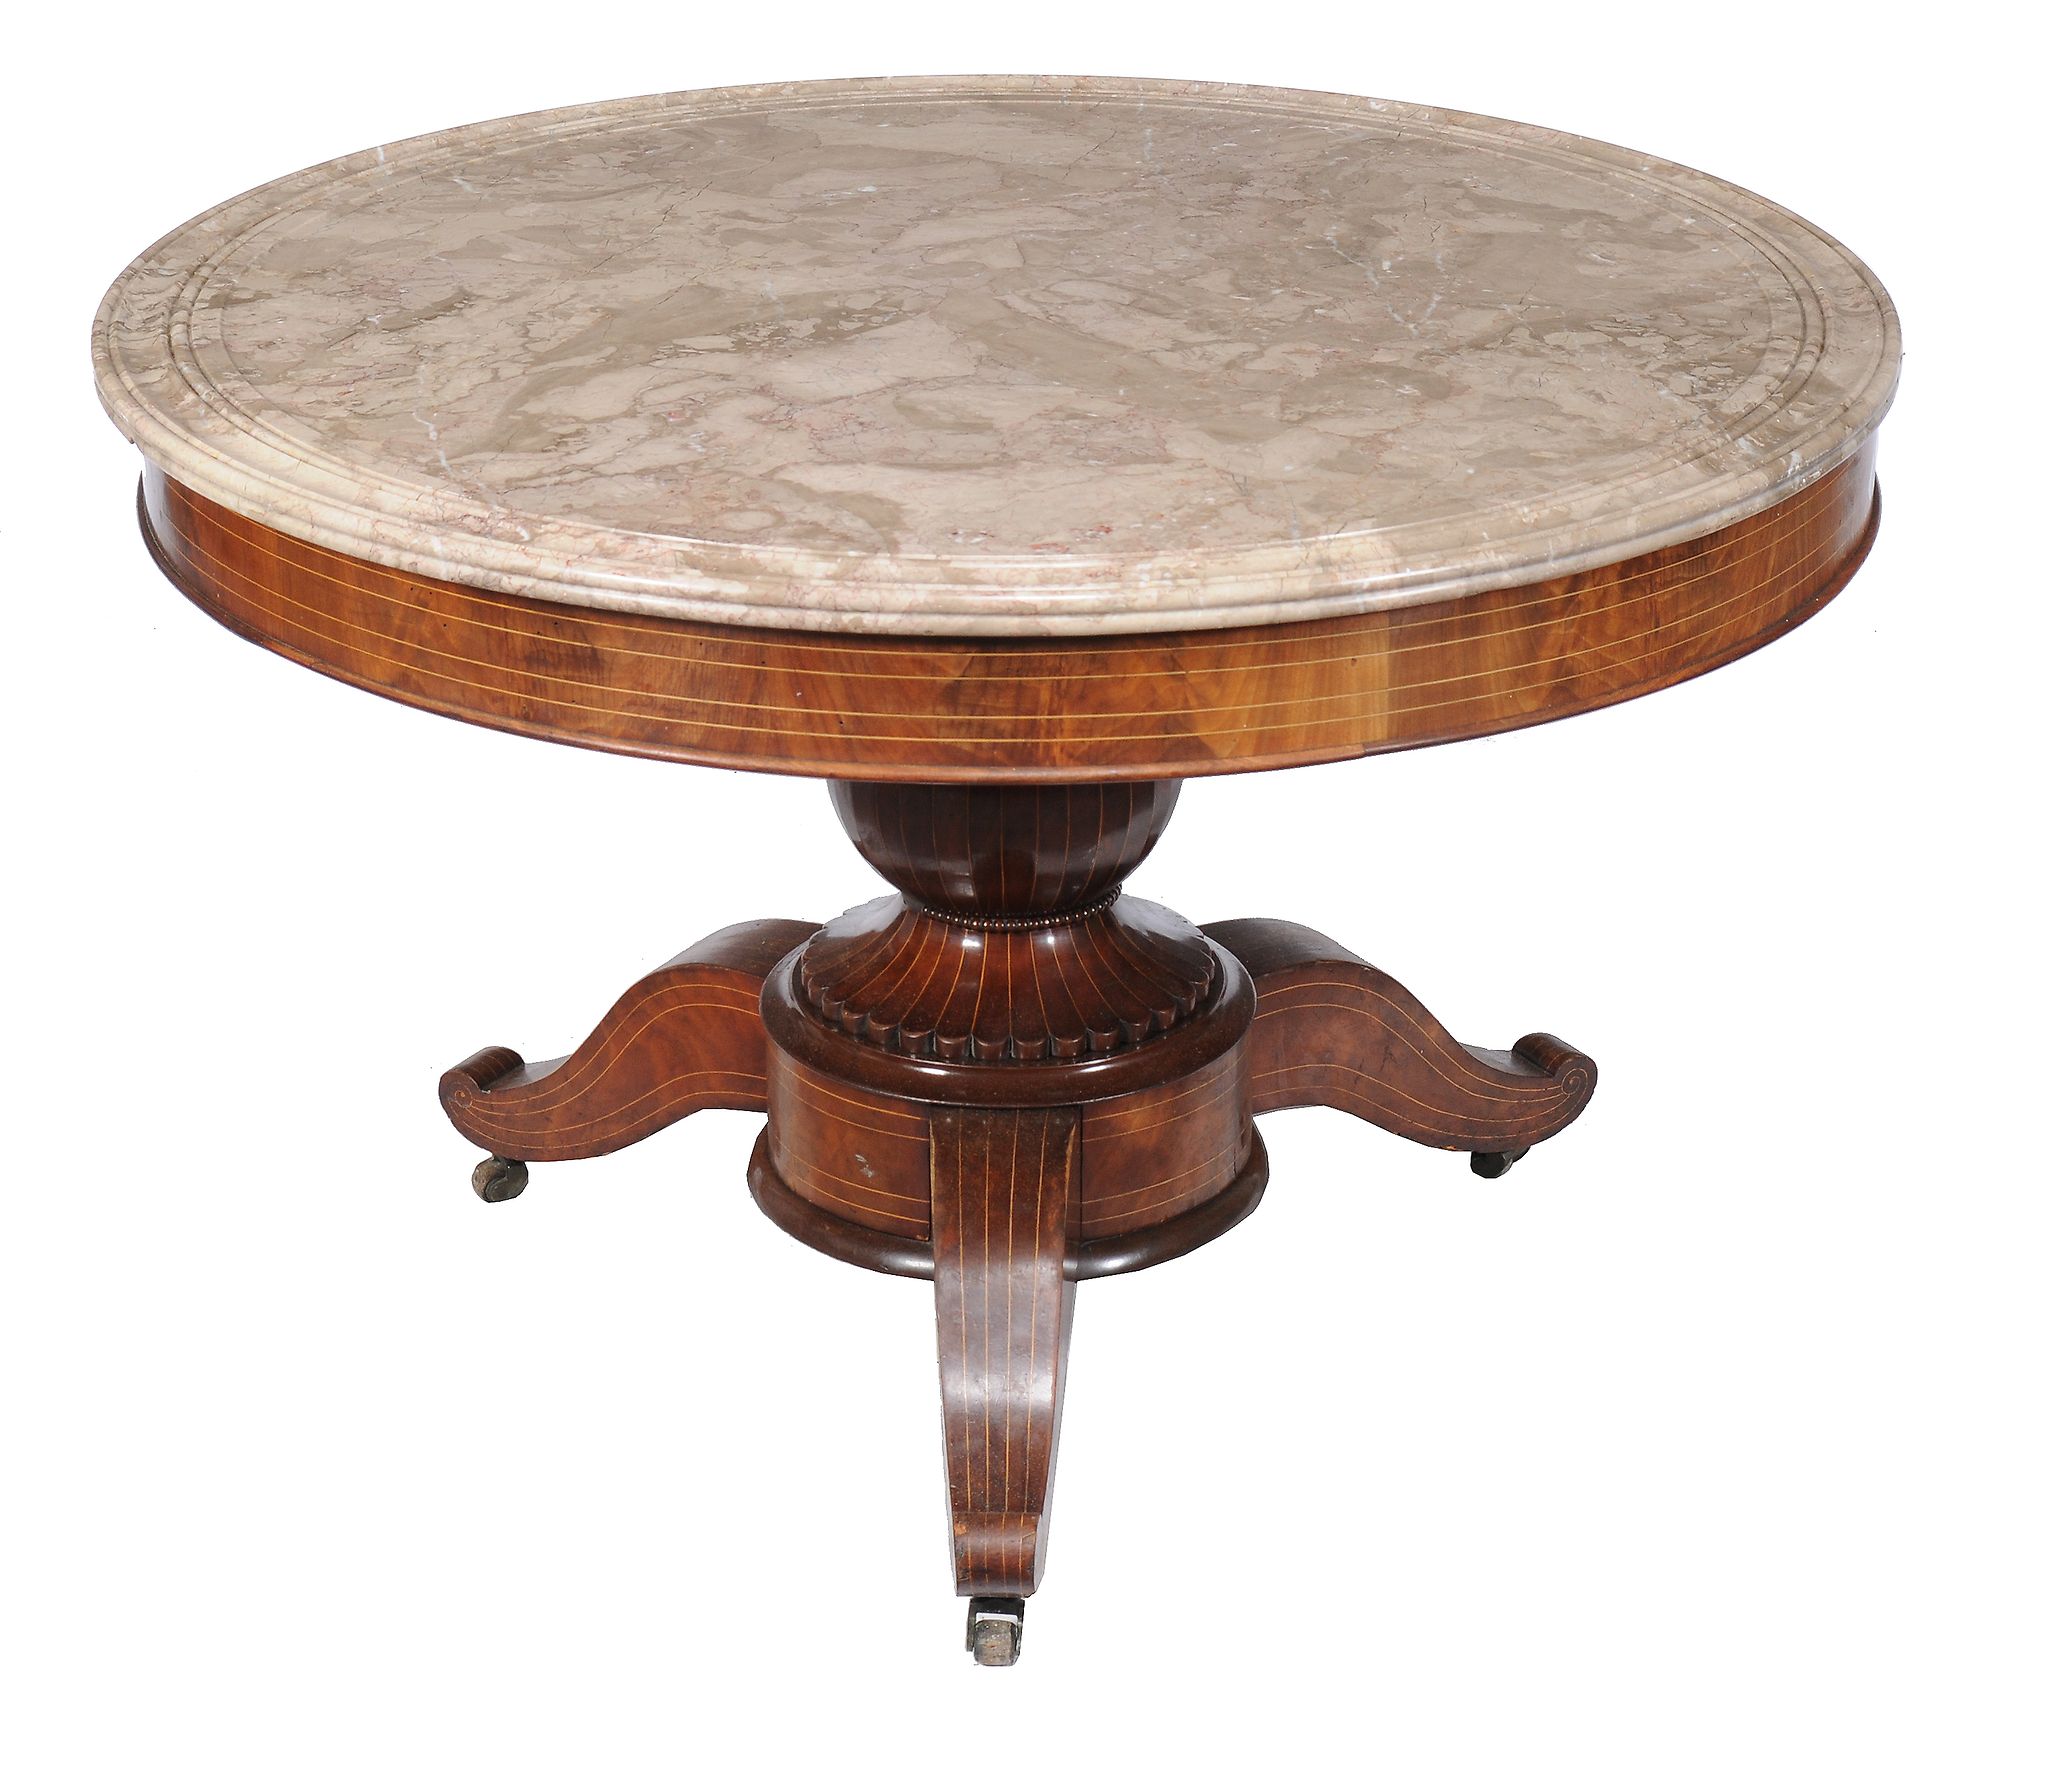 A French walnut, line inlaid, and marble topped centre table , mid 19th century, 72cm high, the